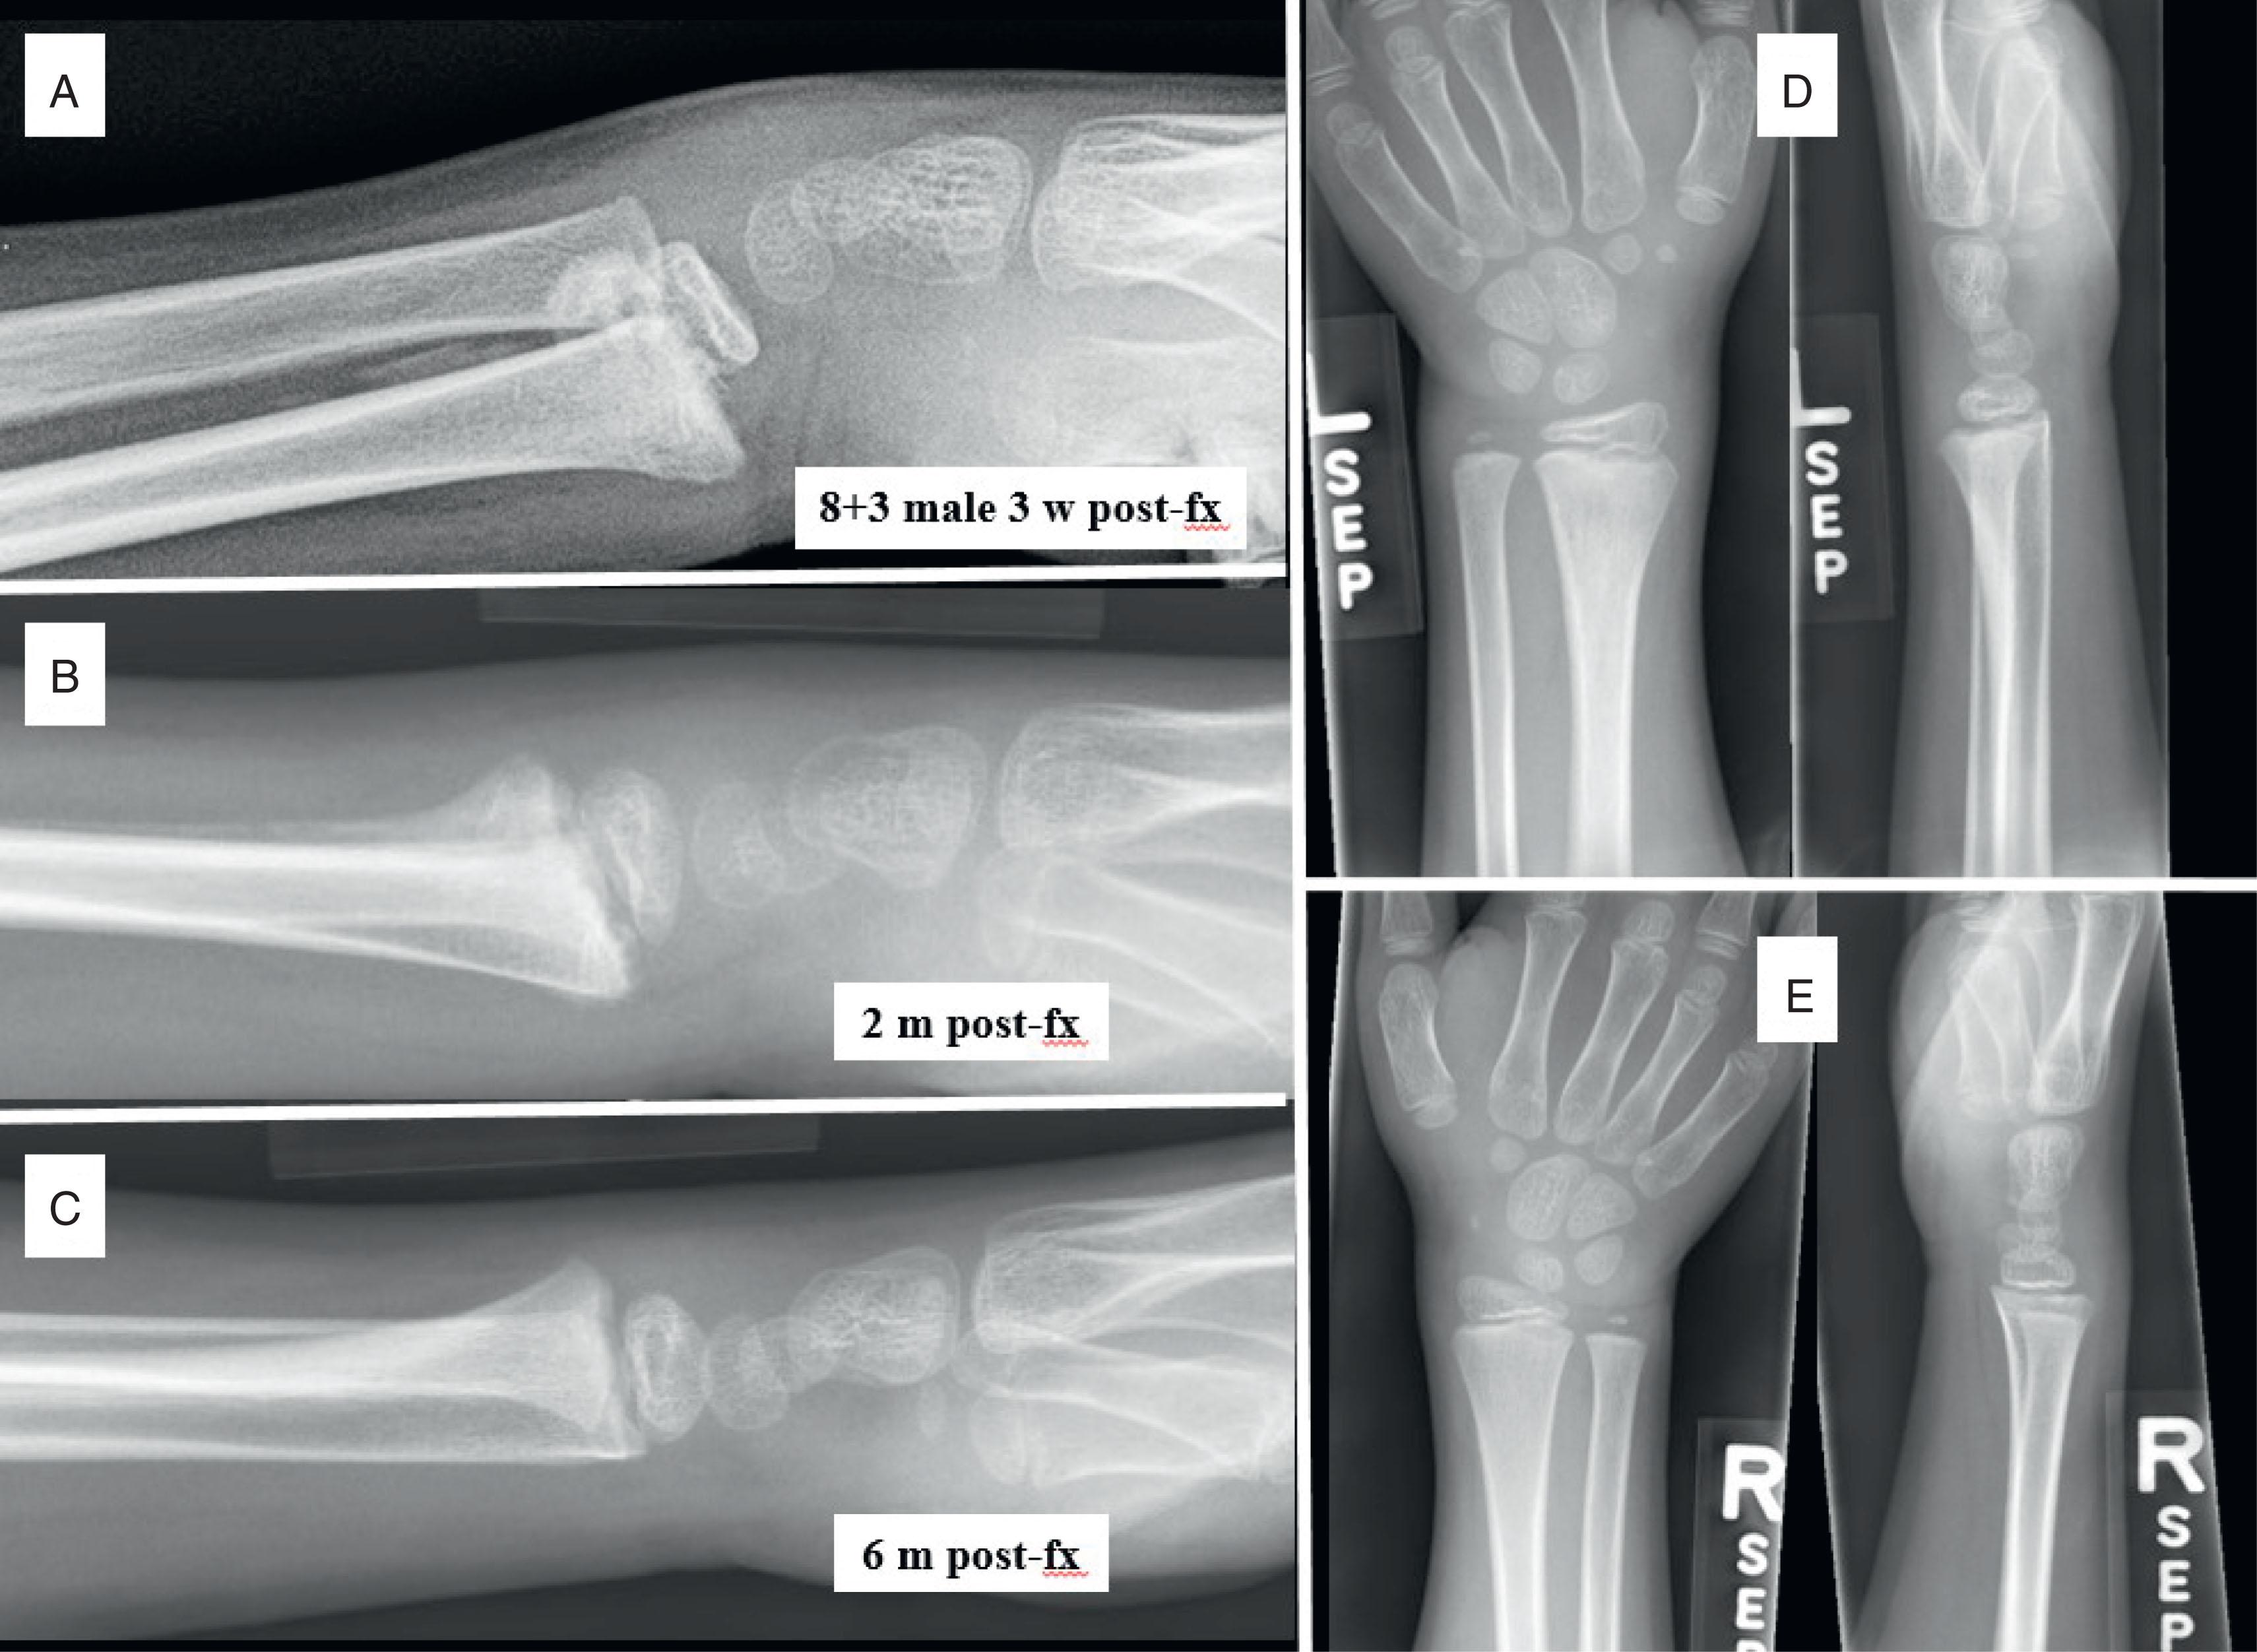 Fig. 6.13, Greater Than 50% Displaced Distal Radius Salter-Harris II Fracture Remodels. (A) An 8-year-old male presents late with displaced distal radius growth plate fracture. Early callus is apparent. (B) Two-month follow-up lateral radiograph. (C) Six-month follow-up lateral radiograph. (D) Anteroposterior (AP) and lateral images of injured left side at 6 months. (E) AP and lateral images of right side for comparison at 6 months.